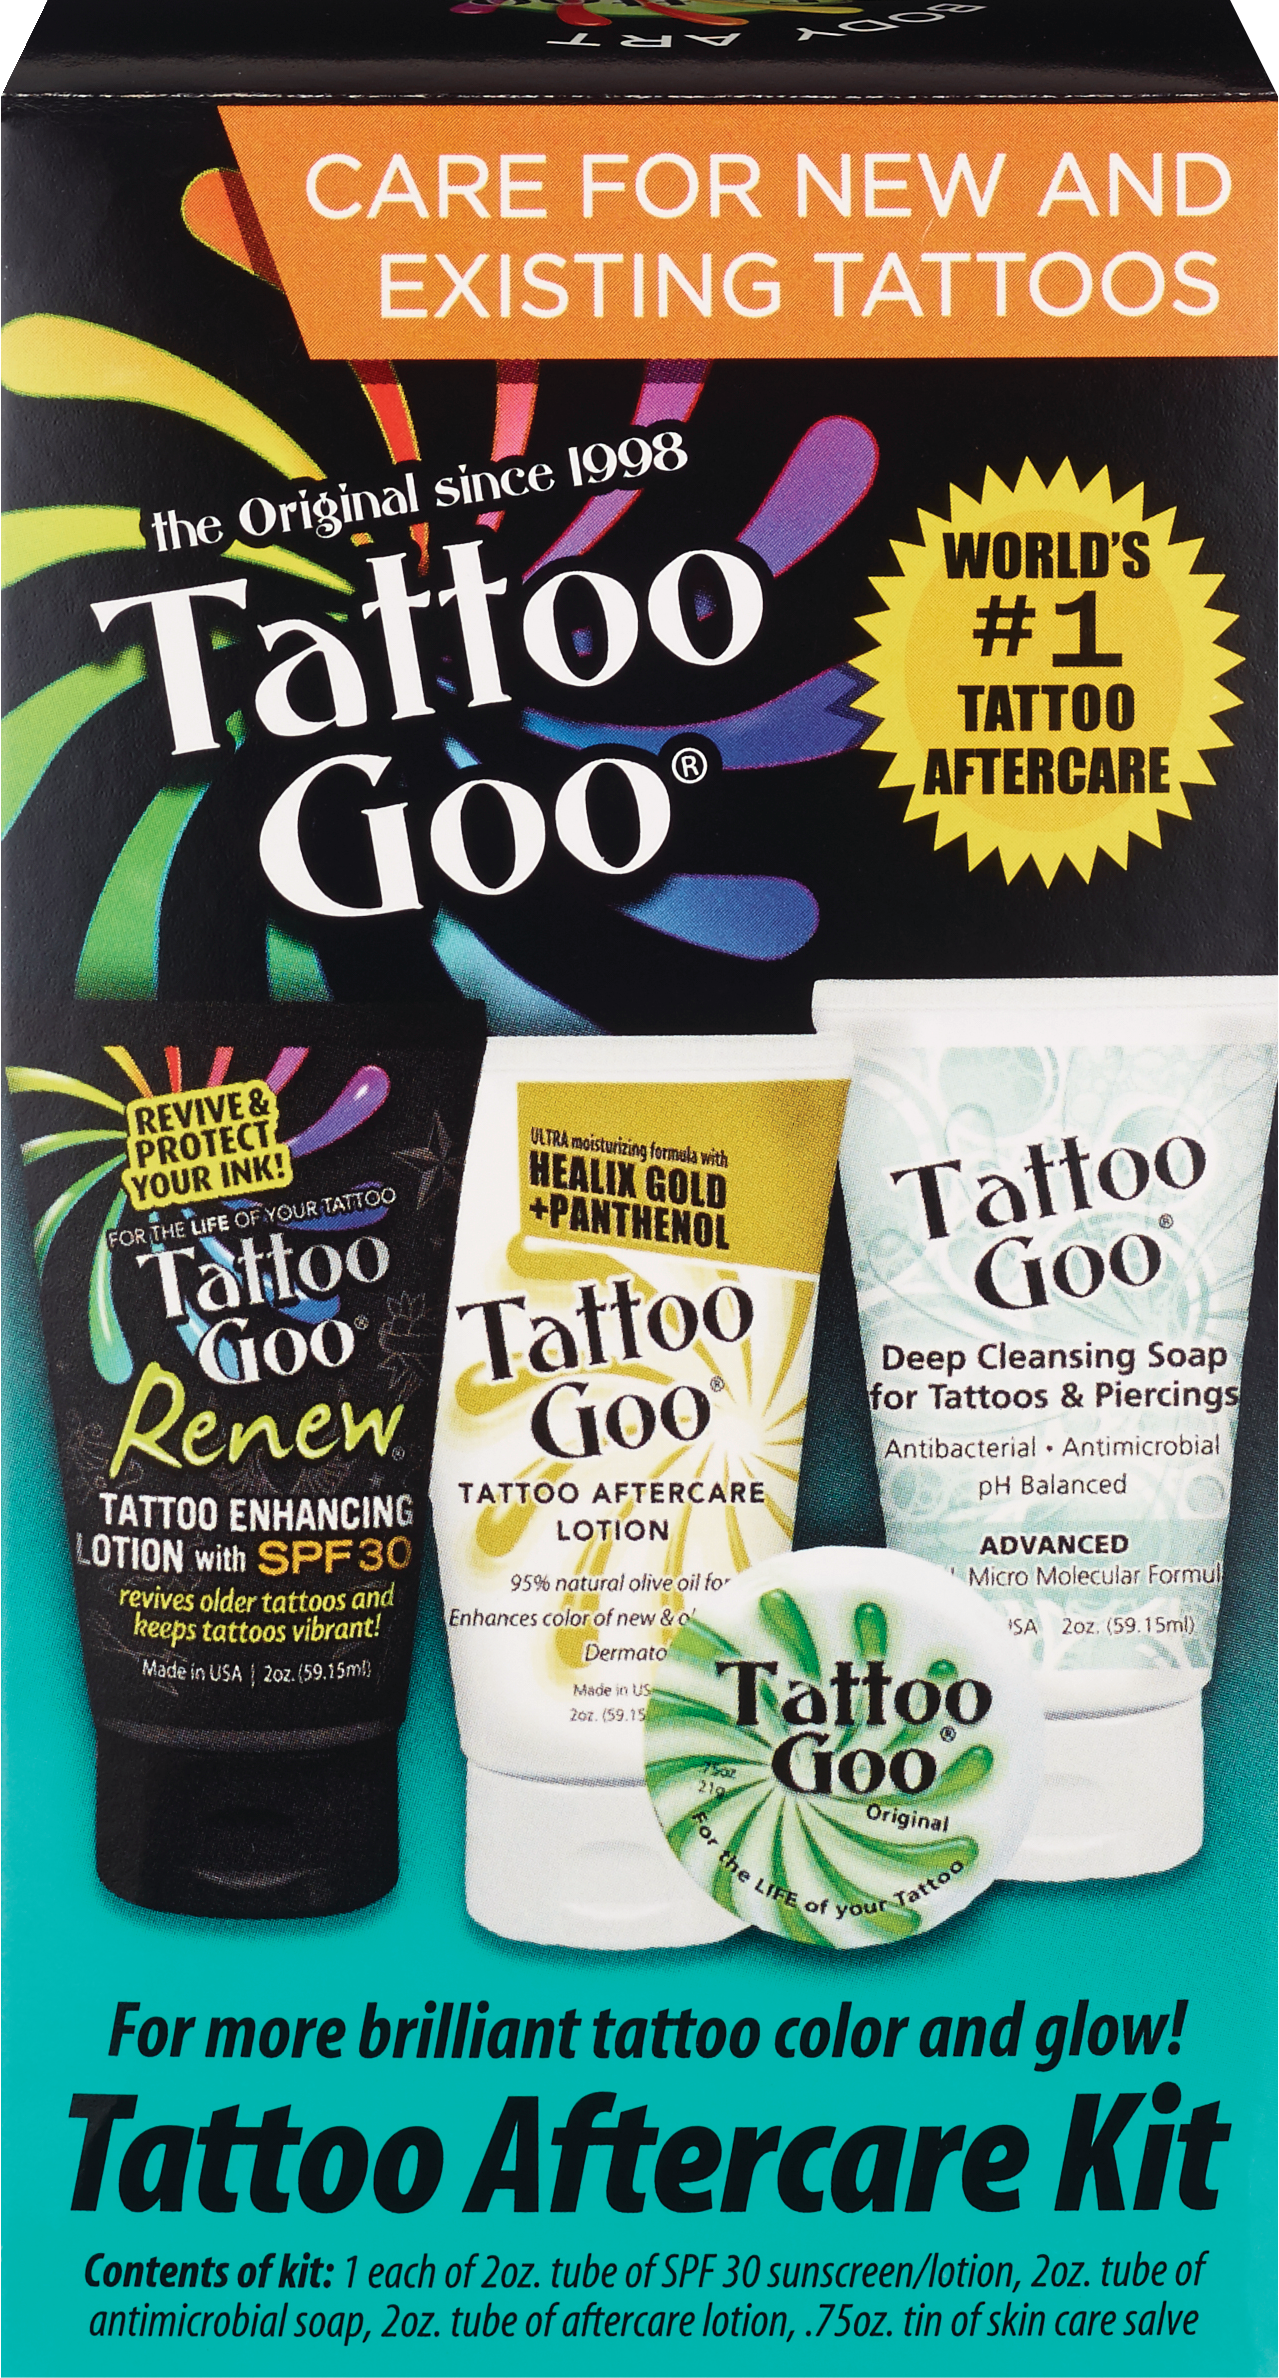 Tattoo Goo Tattoo AfterCare Kit | Pick Up In Store TODAY at CVS